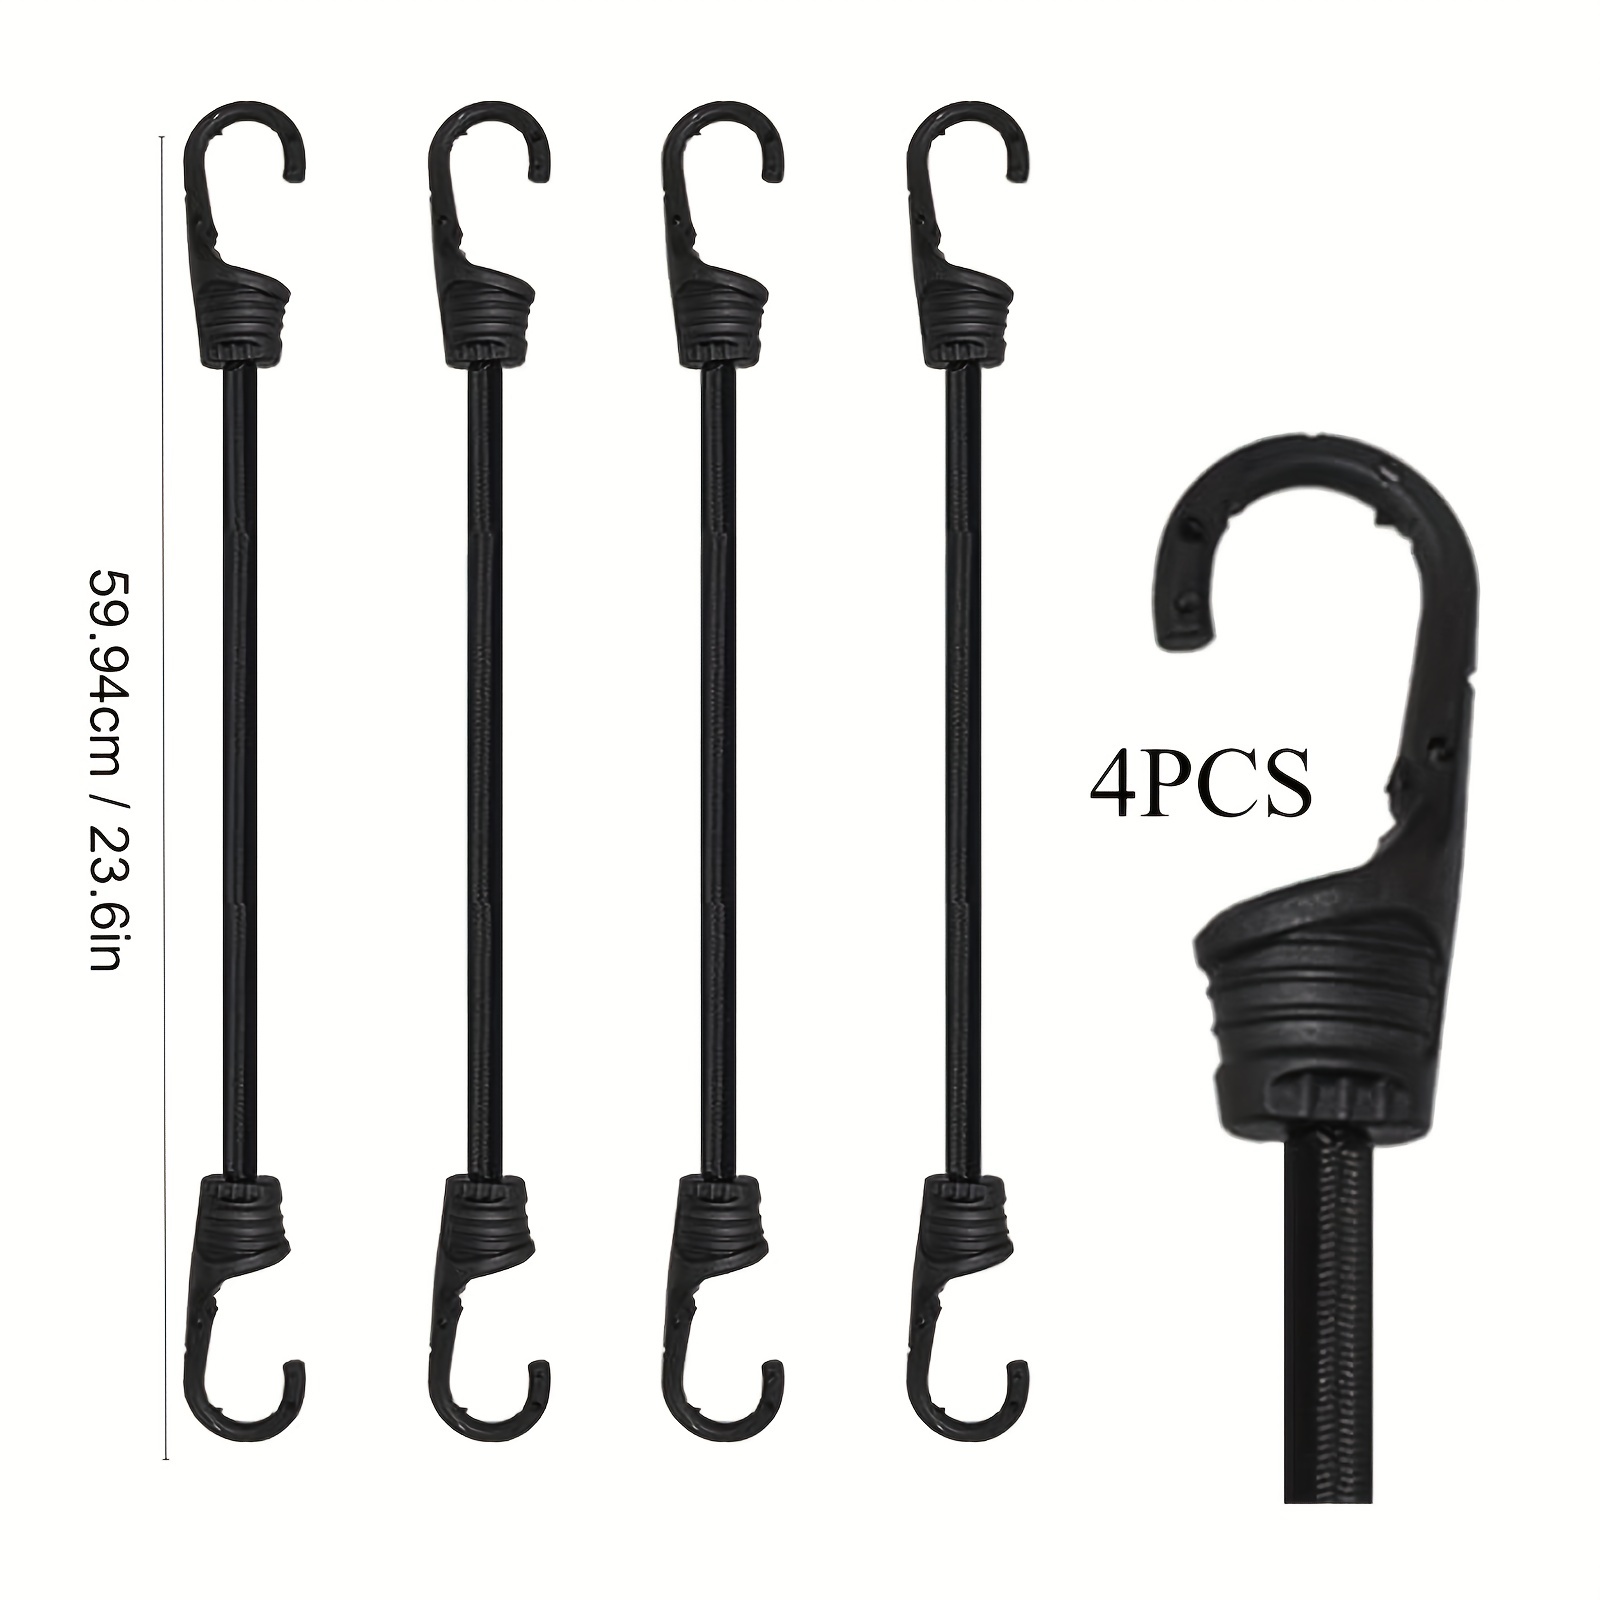 4pcs Bungee Cords With Hooks Elastic Rope Straps For Camping Bike Luggage, Check Out Today's Deals Now